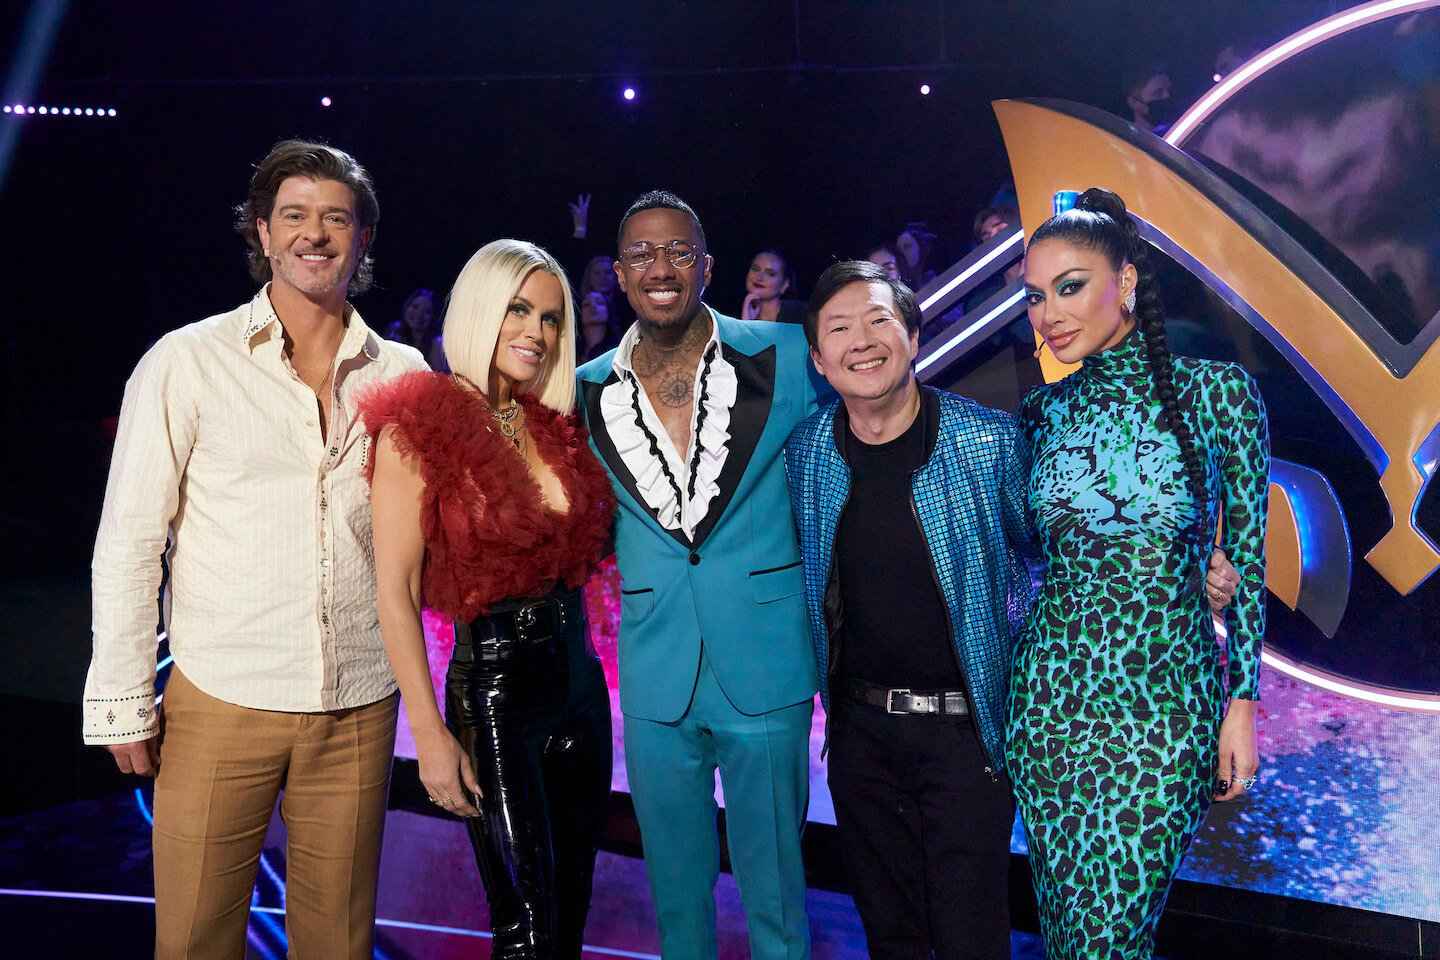 'The Masked Singer' host Nick Cannon smiling and posing with the other judges, including Nicole Scherzinger